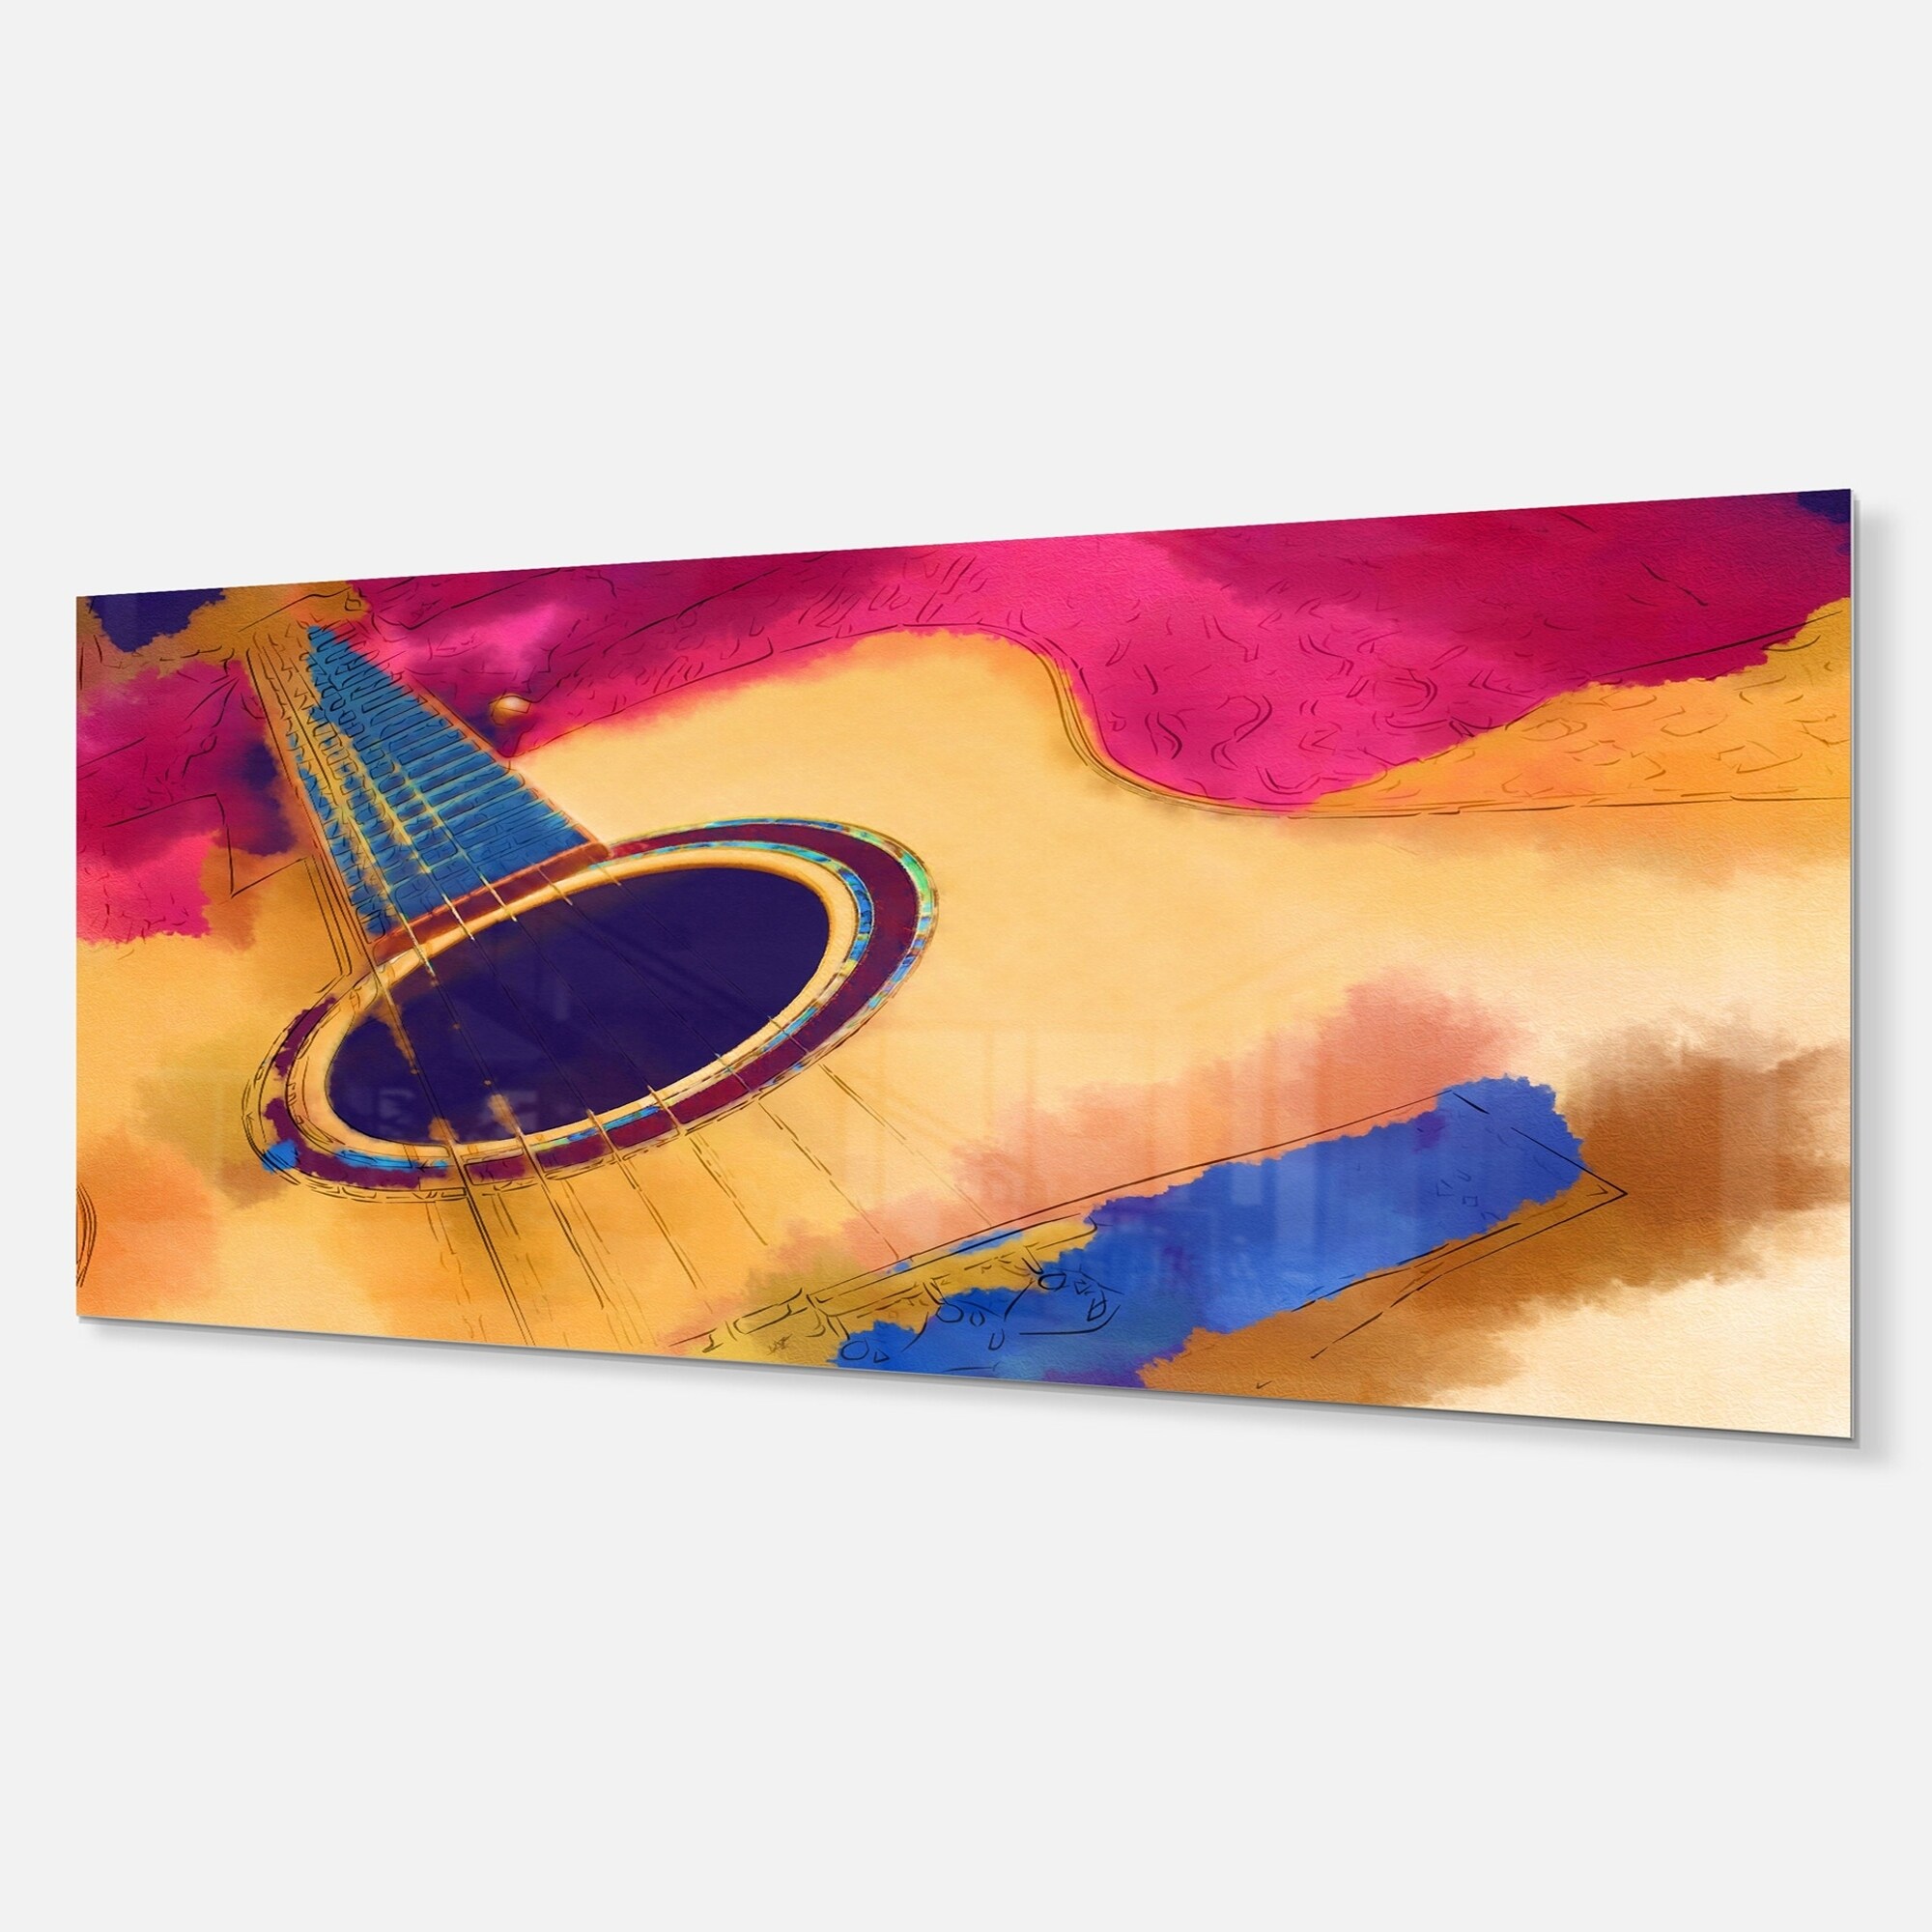 Shop Designart Listen To The Colorful Music Music Metal Wall Art Overstock 11846616